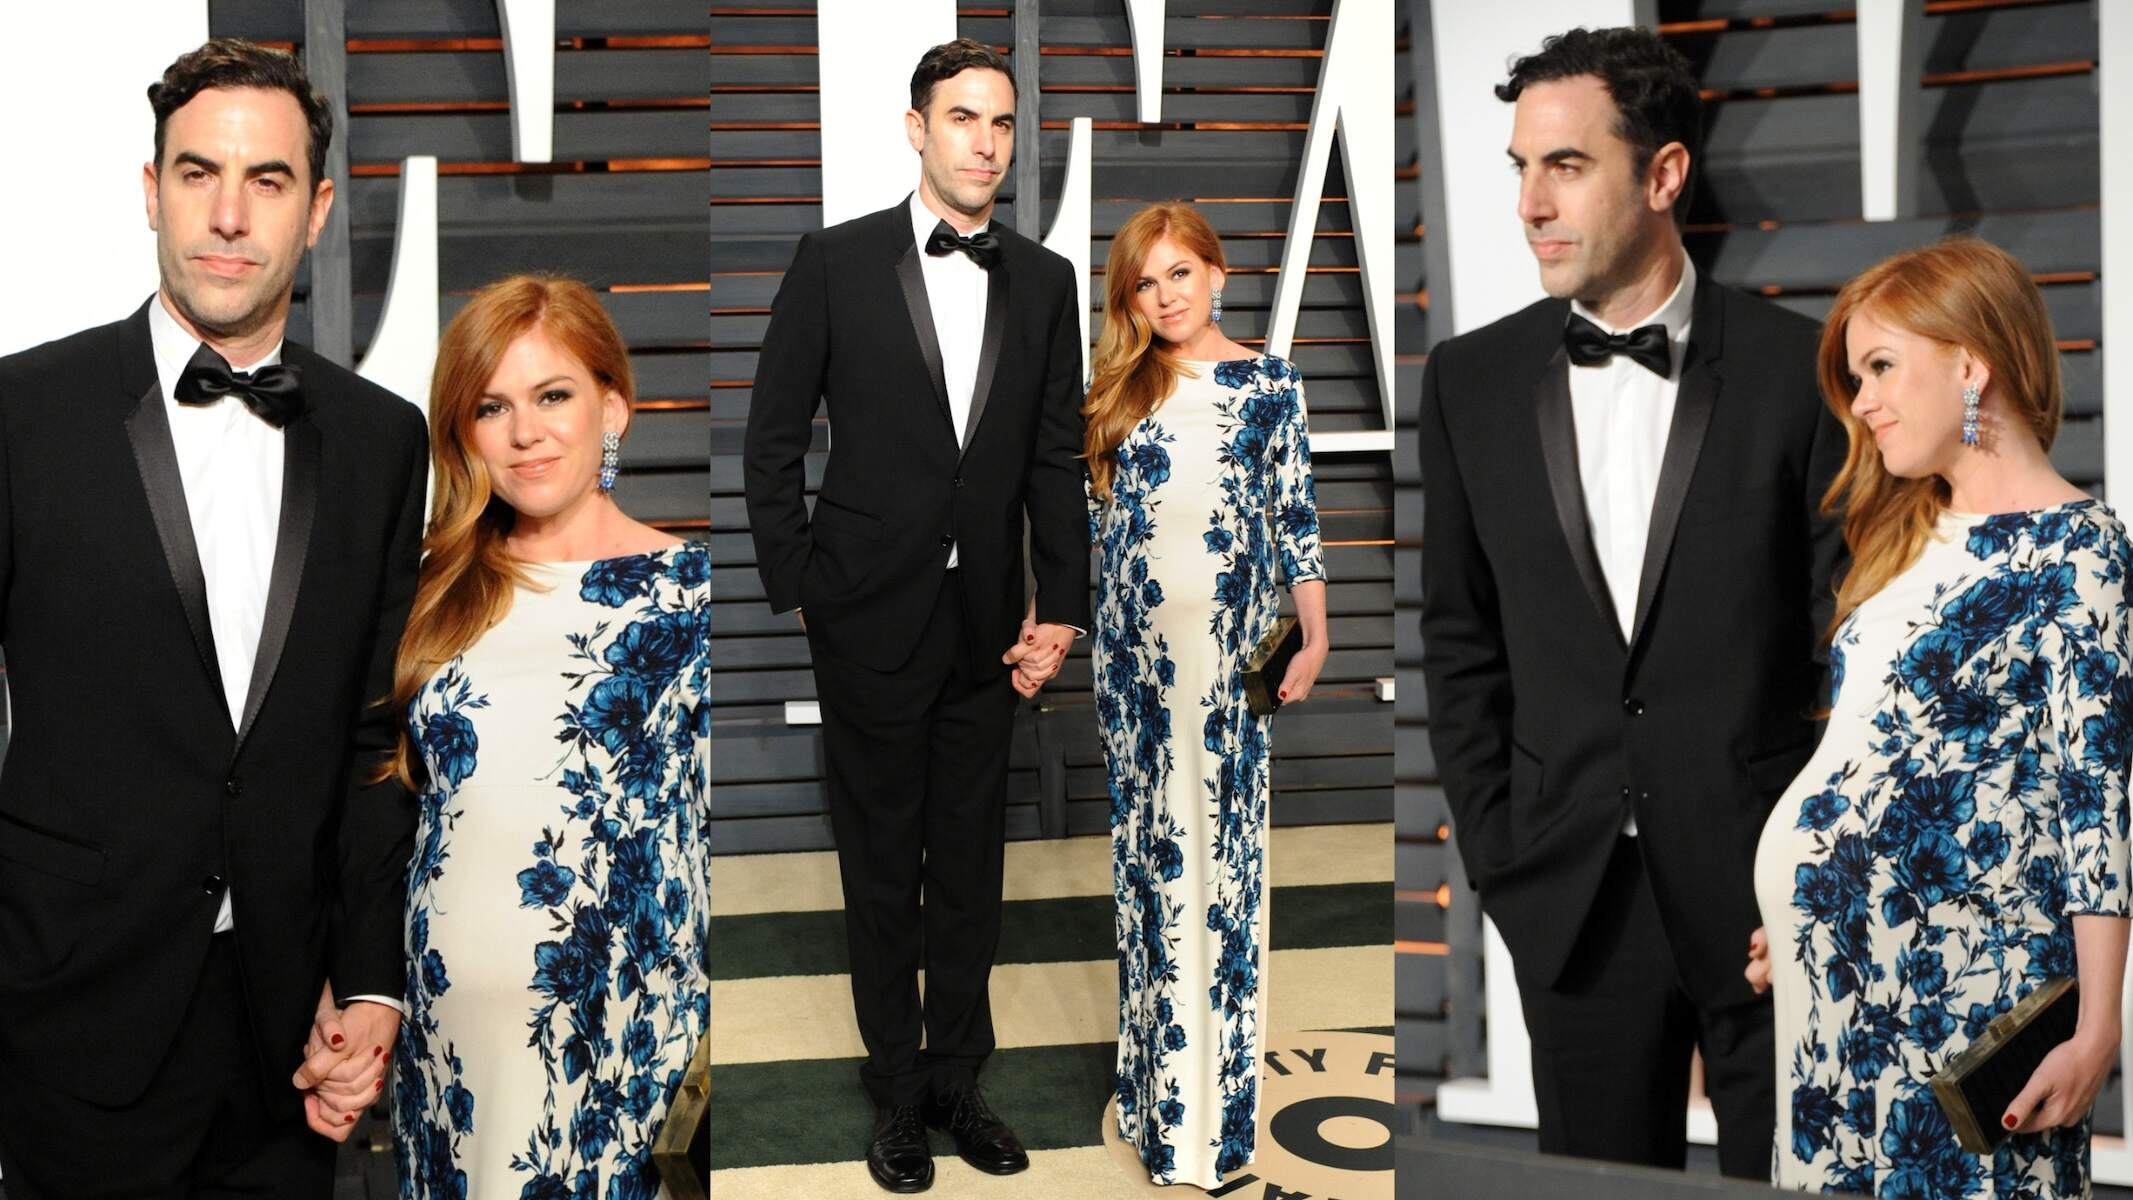 Sacha Baron Cohen in a black tuxedo and a pregnant Isla Fisher in a white and blue dress attend the 2015 Vanity Fair Oscar Party